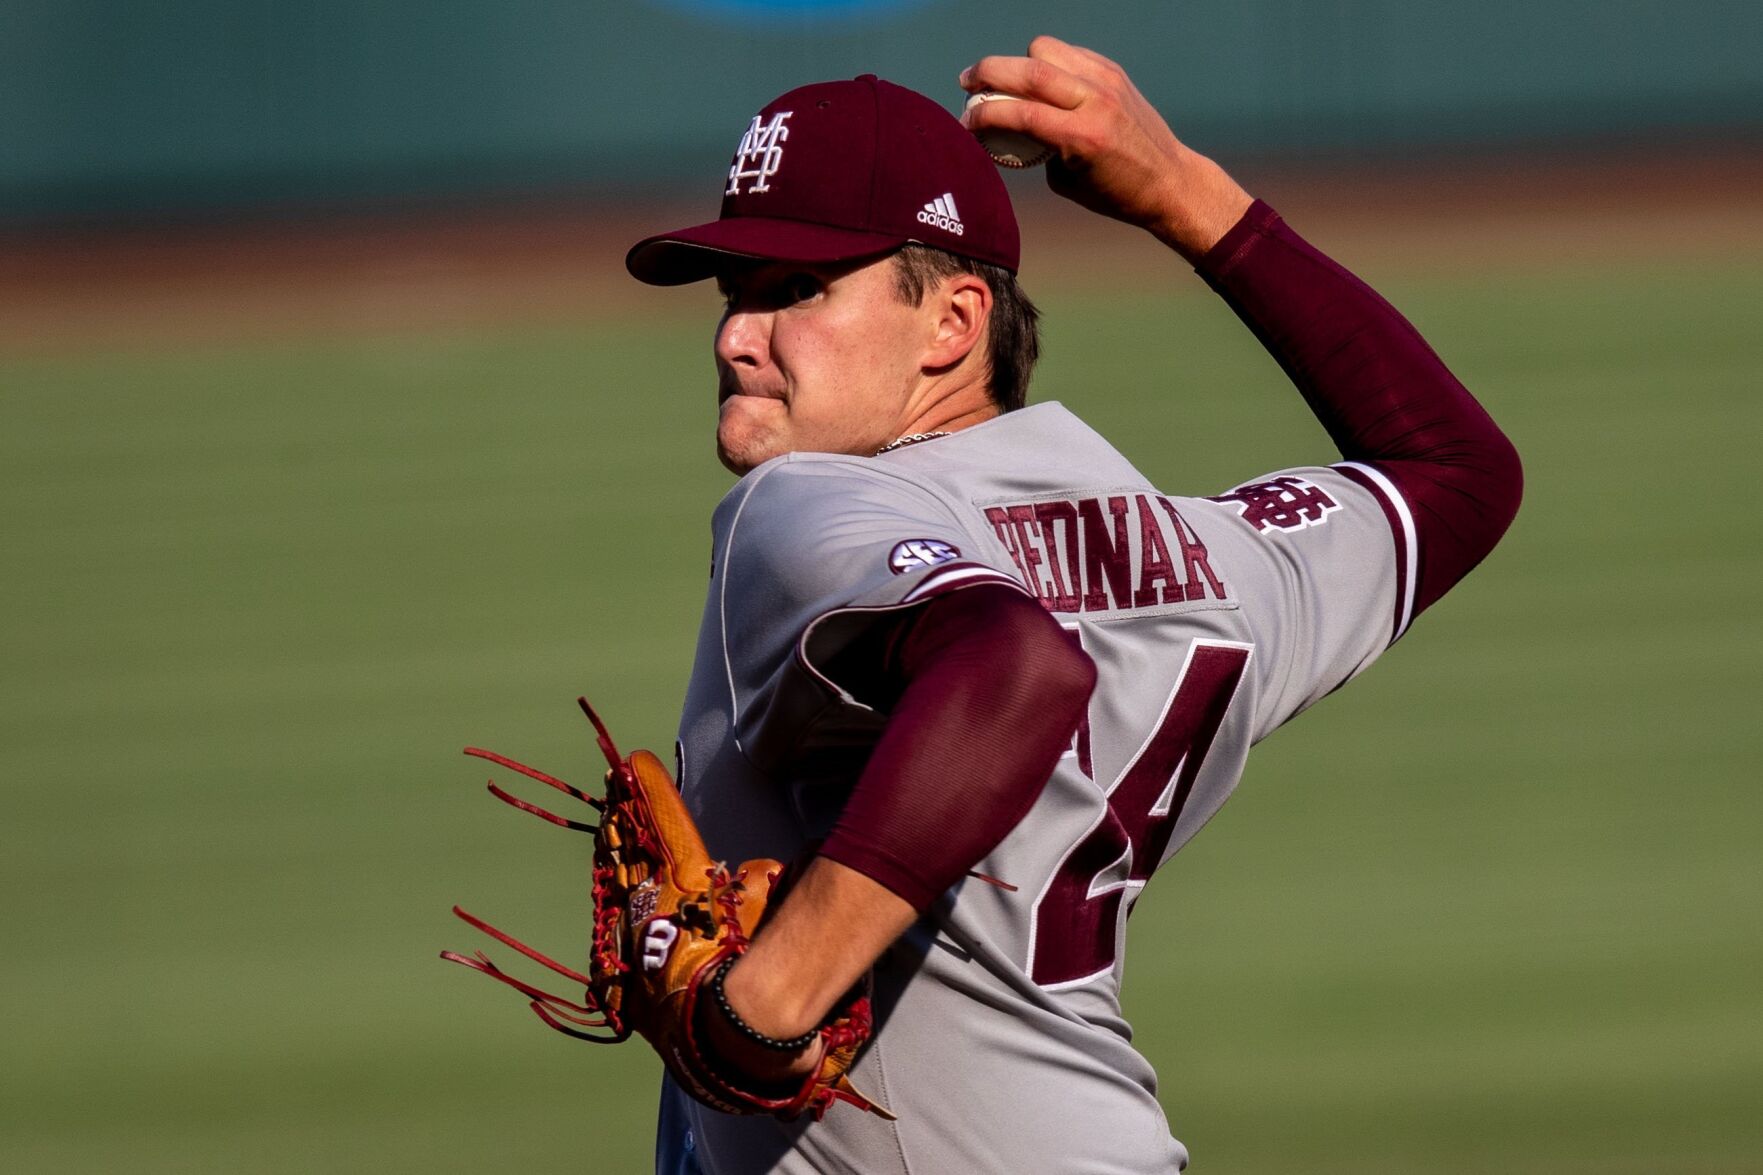 Mississippi State pitchers break CWS record for strikeouts in defeat of Texas